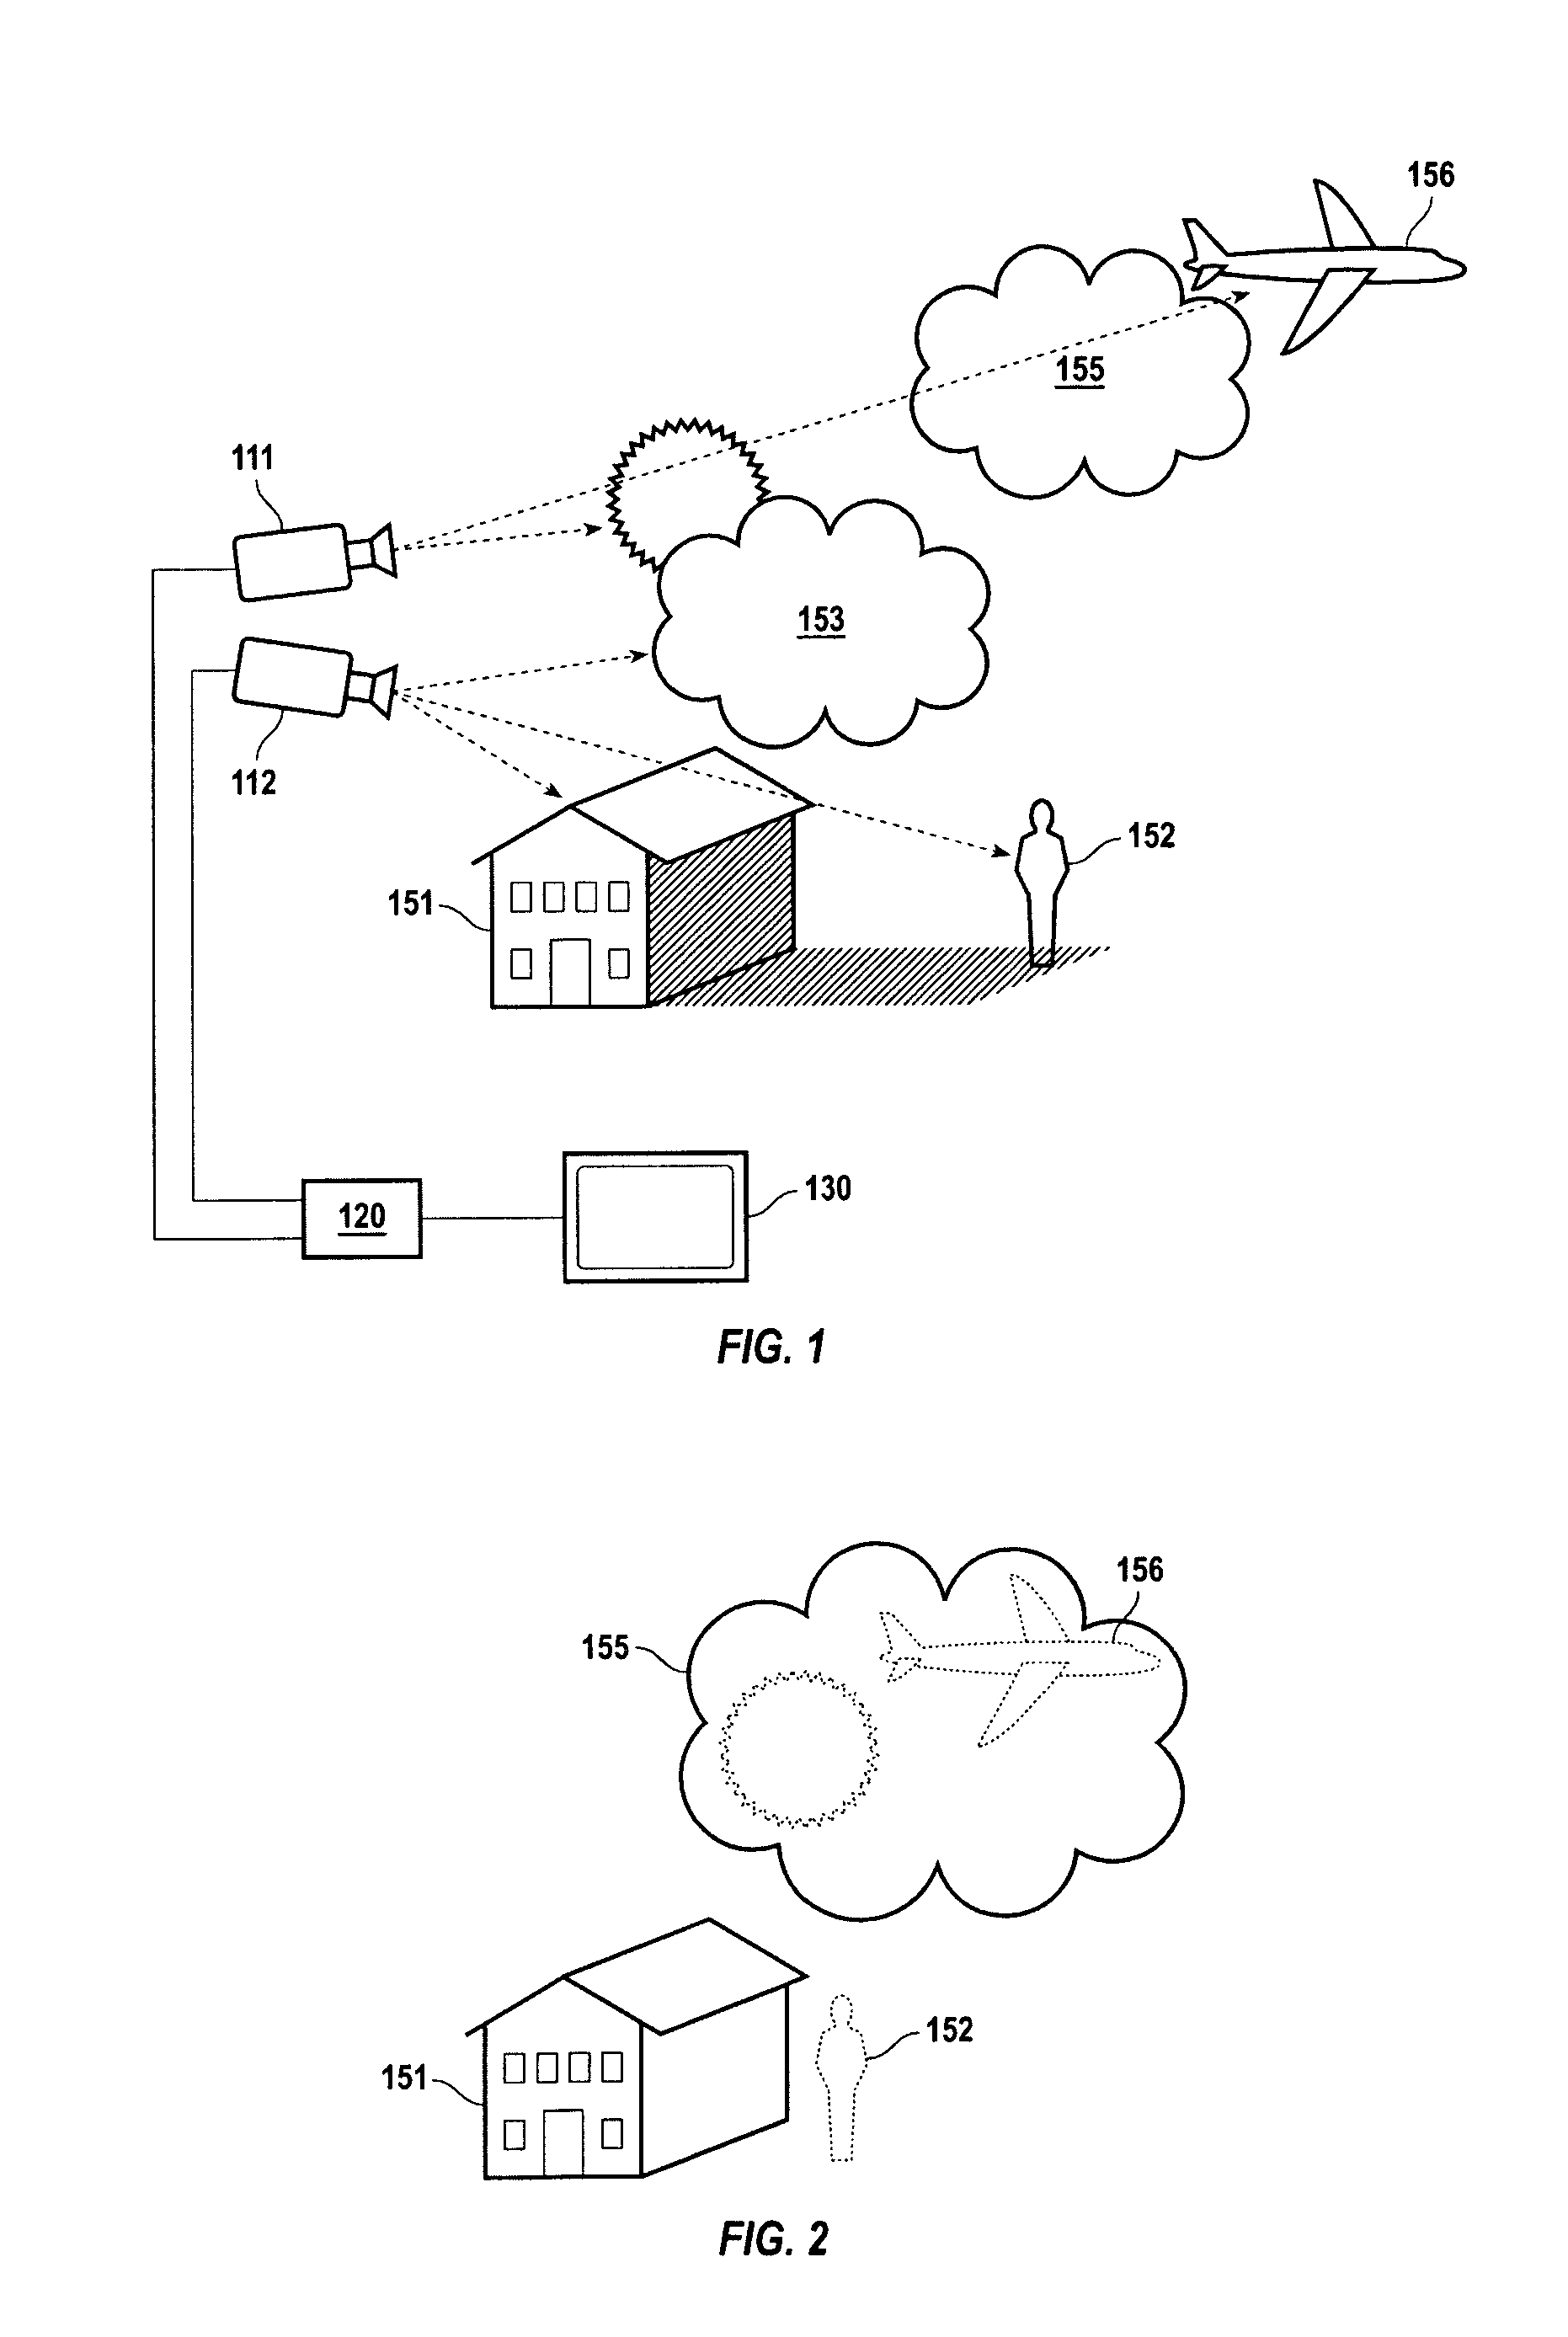 Method of fusion or merging imagery data for improved visual perception using monoscopic and stereographic fusion and retinal decay techniques